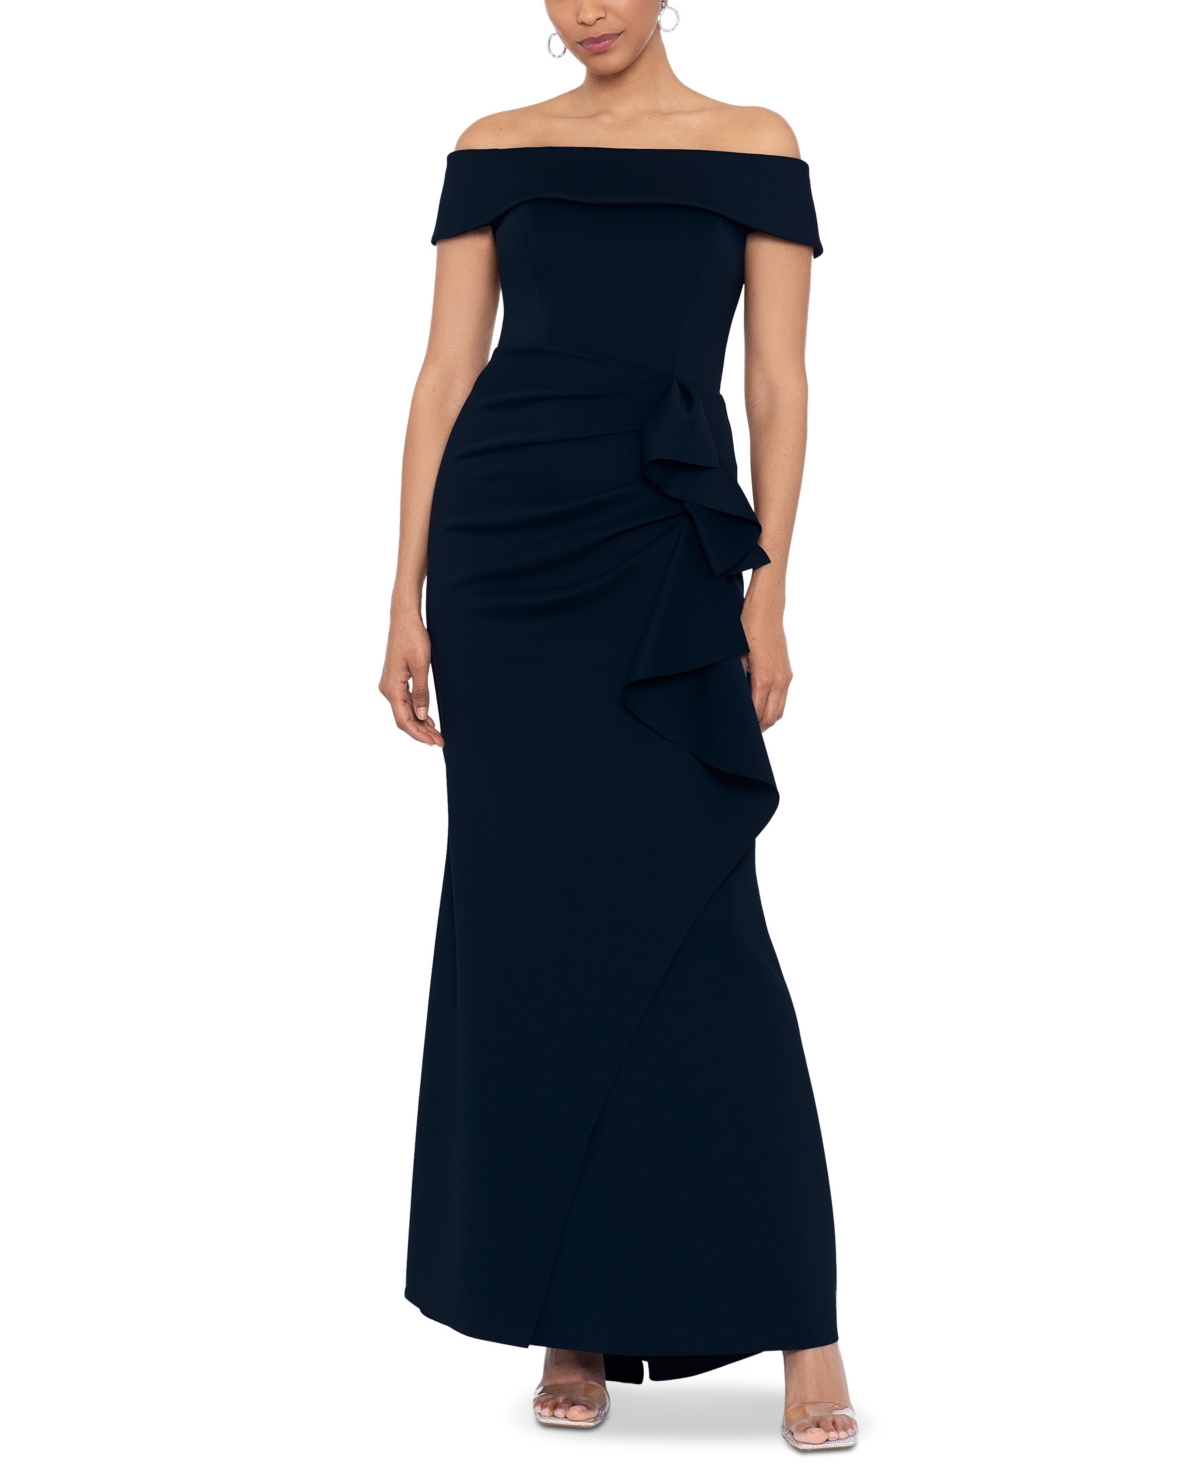 Women's Off-The-Shoulder Gown - Midnight